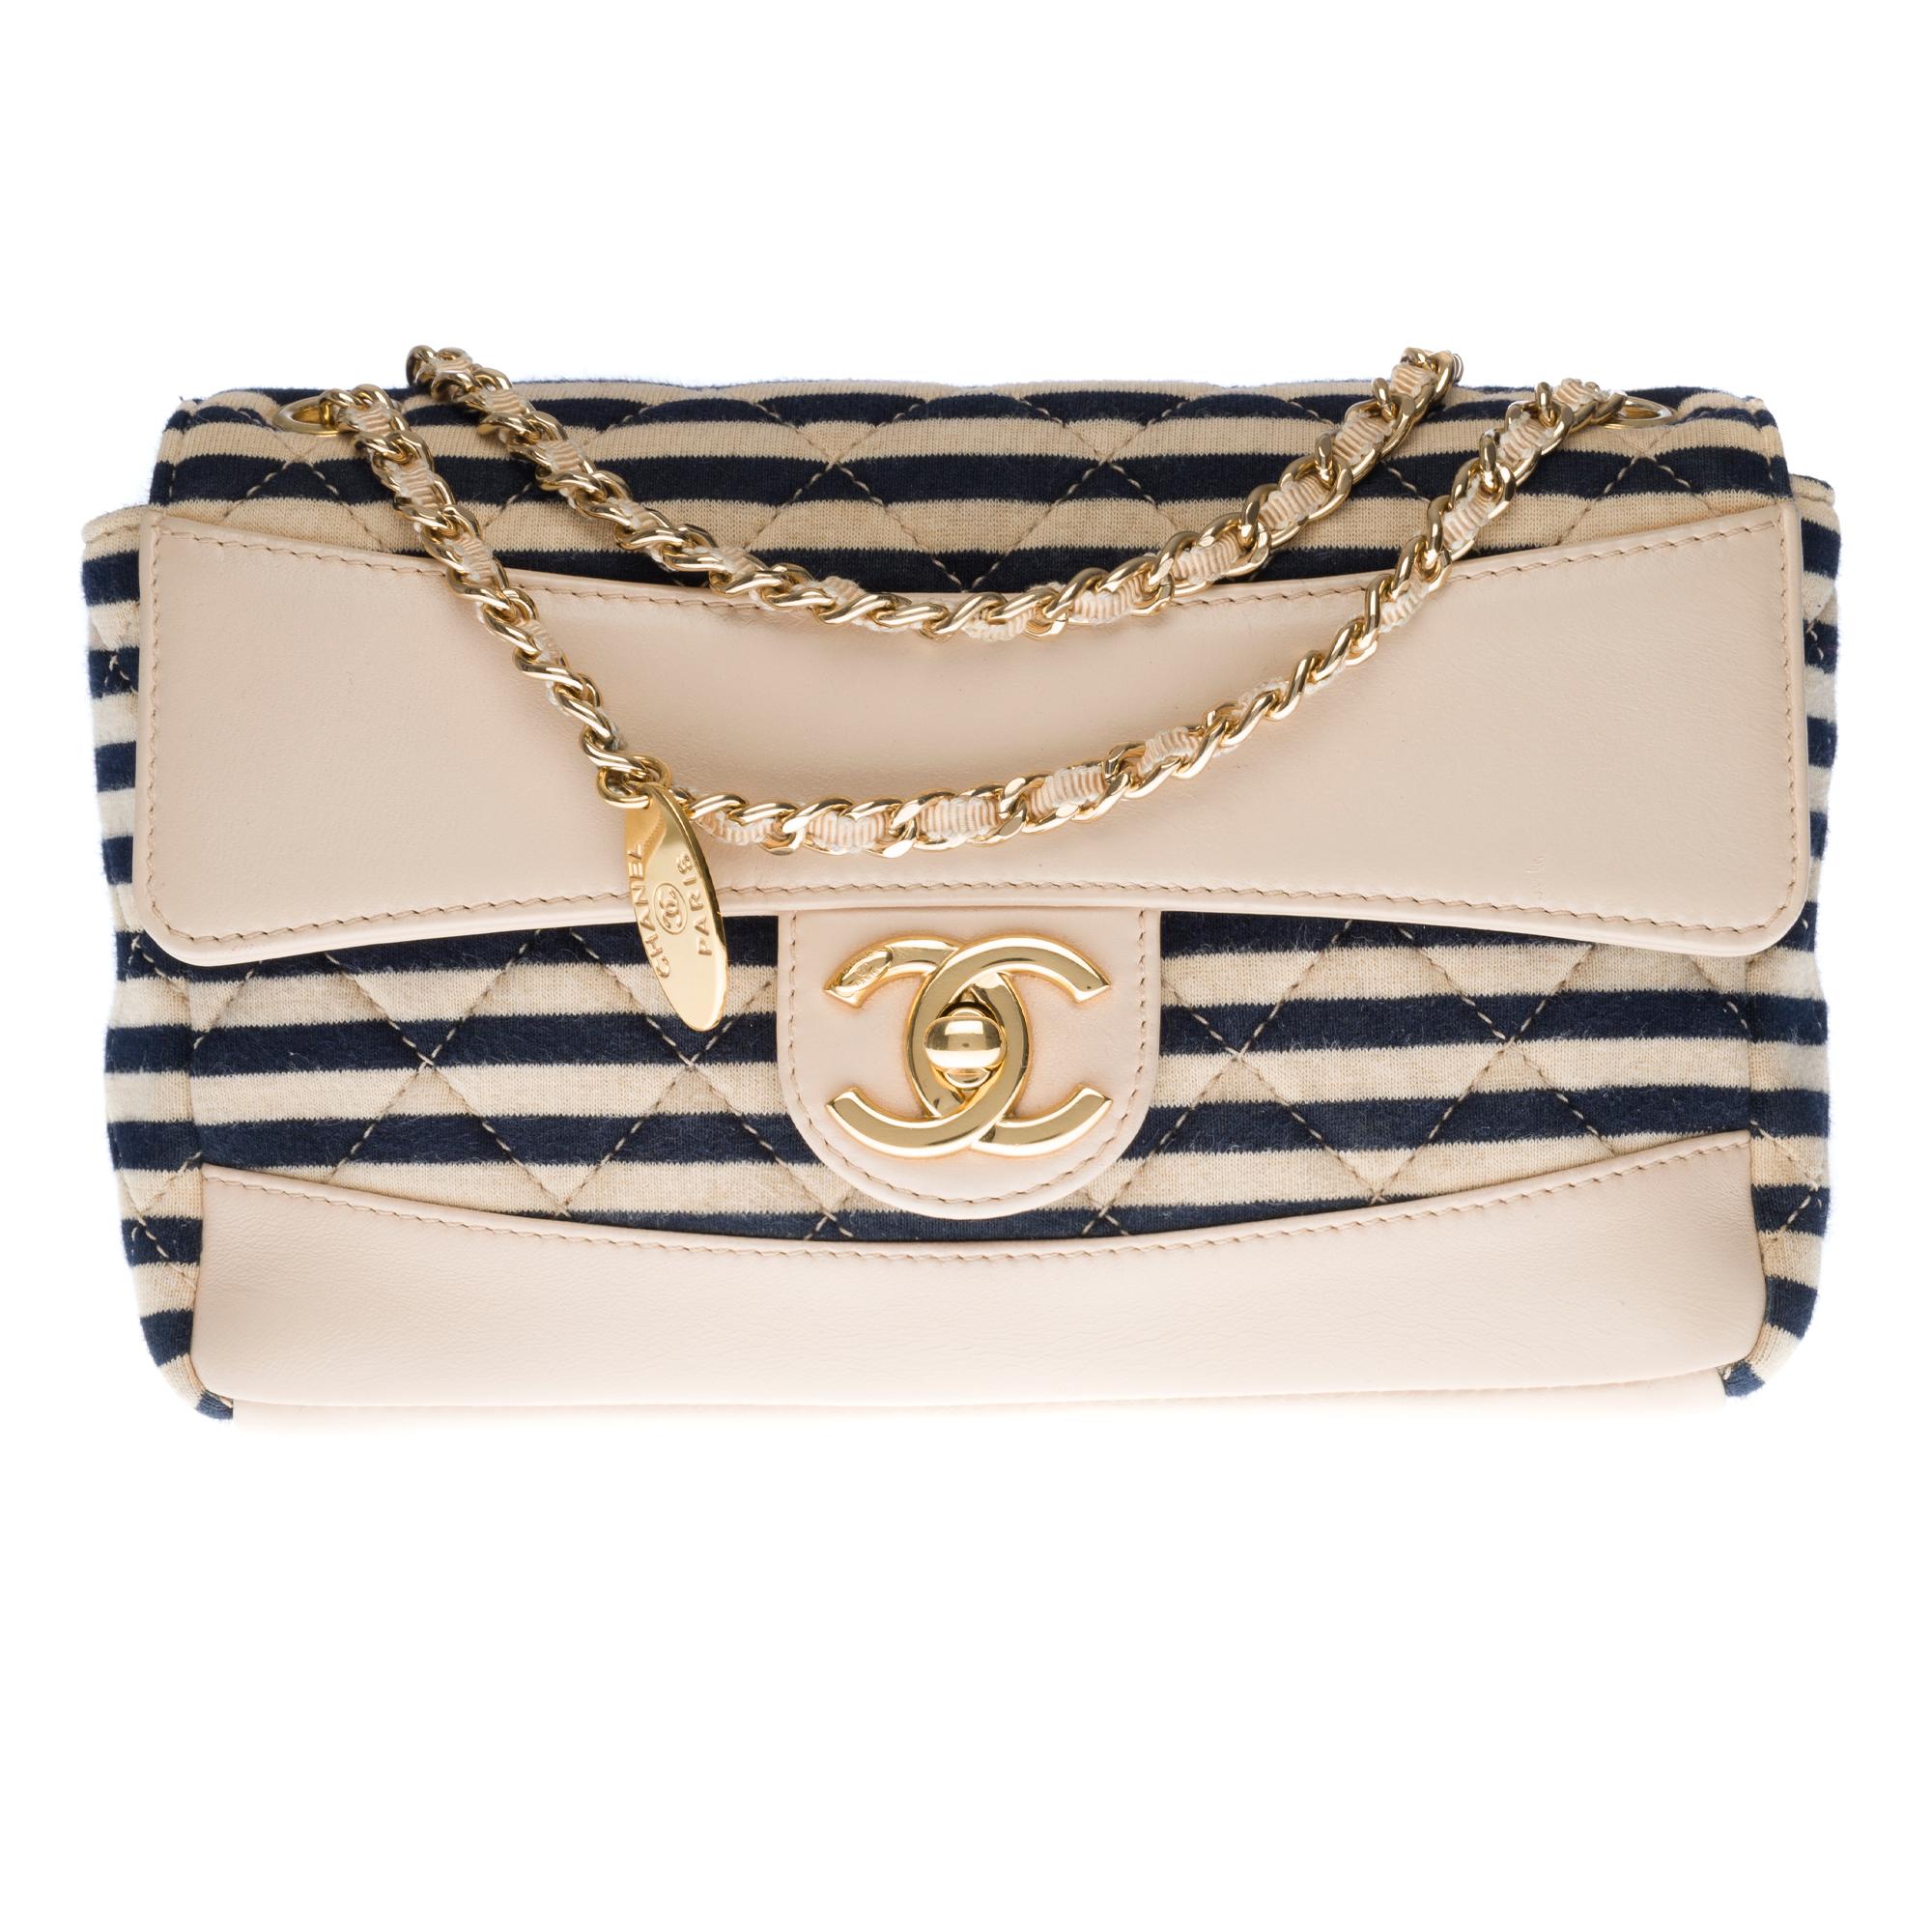 The Stunning & Rare shoulder bag Chanel New Mini Timeless single Flap bi-material beige leather and cotton striped quilted navy blue accompanied by his wallet, gold metal hardware, chain-chain gold metal intertwined with beige ribbon wearing a charm